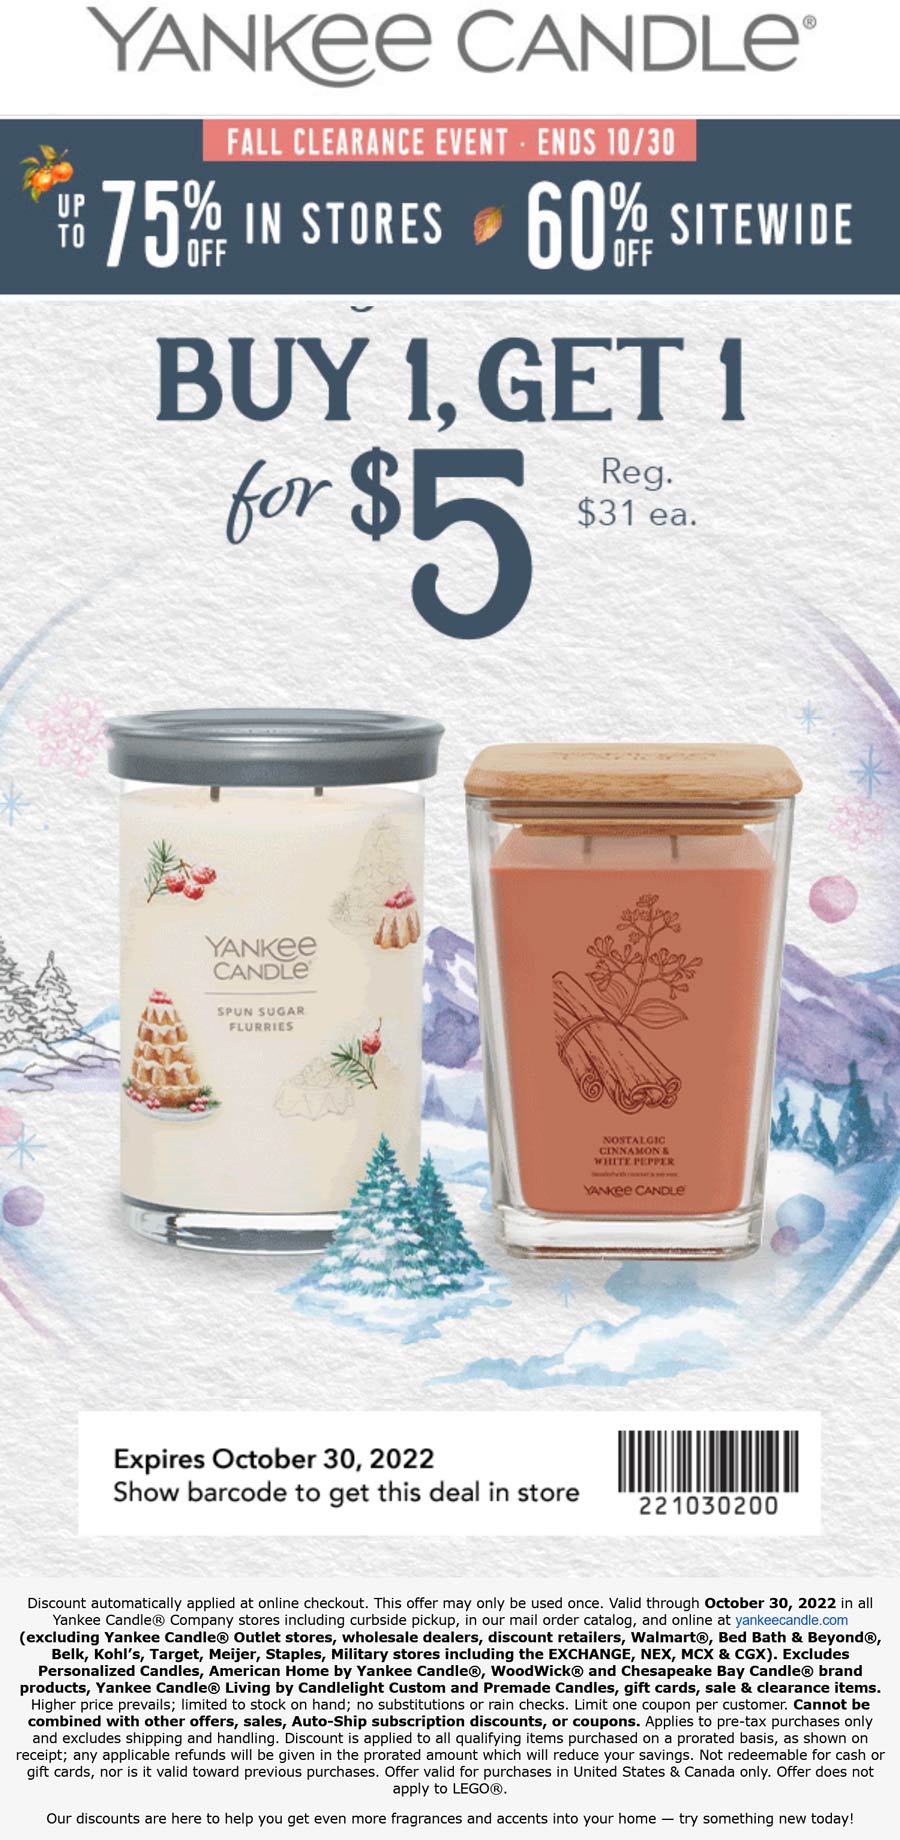 Yankee Candle stores Coupon  Second large candle $5 today at Yankee Candle, ditto online #yankeecandle 